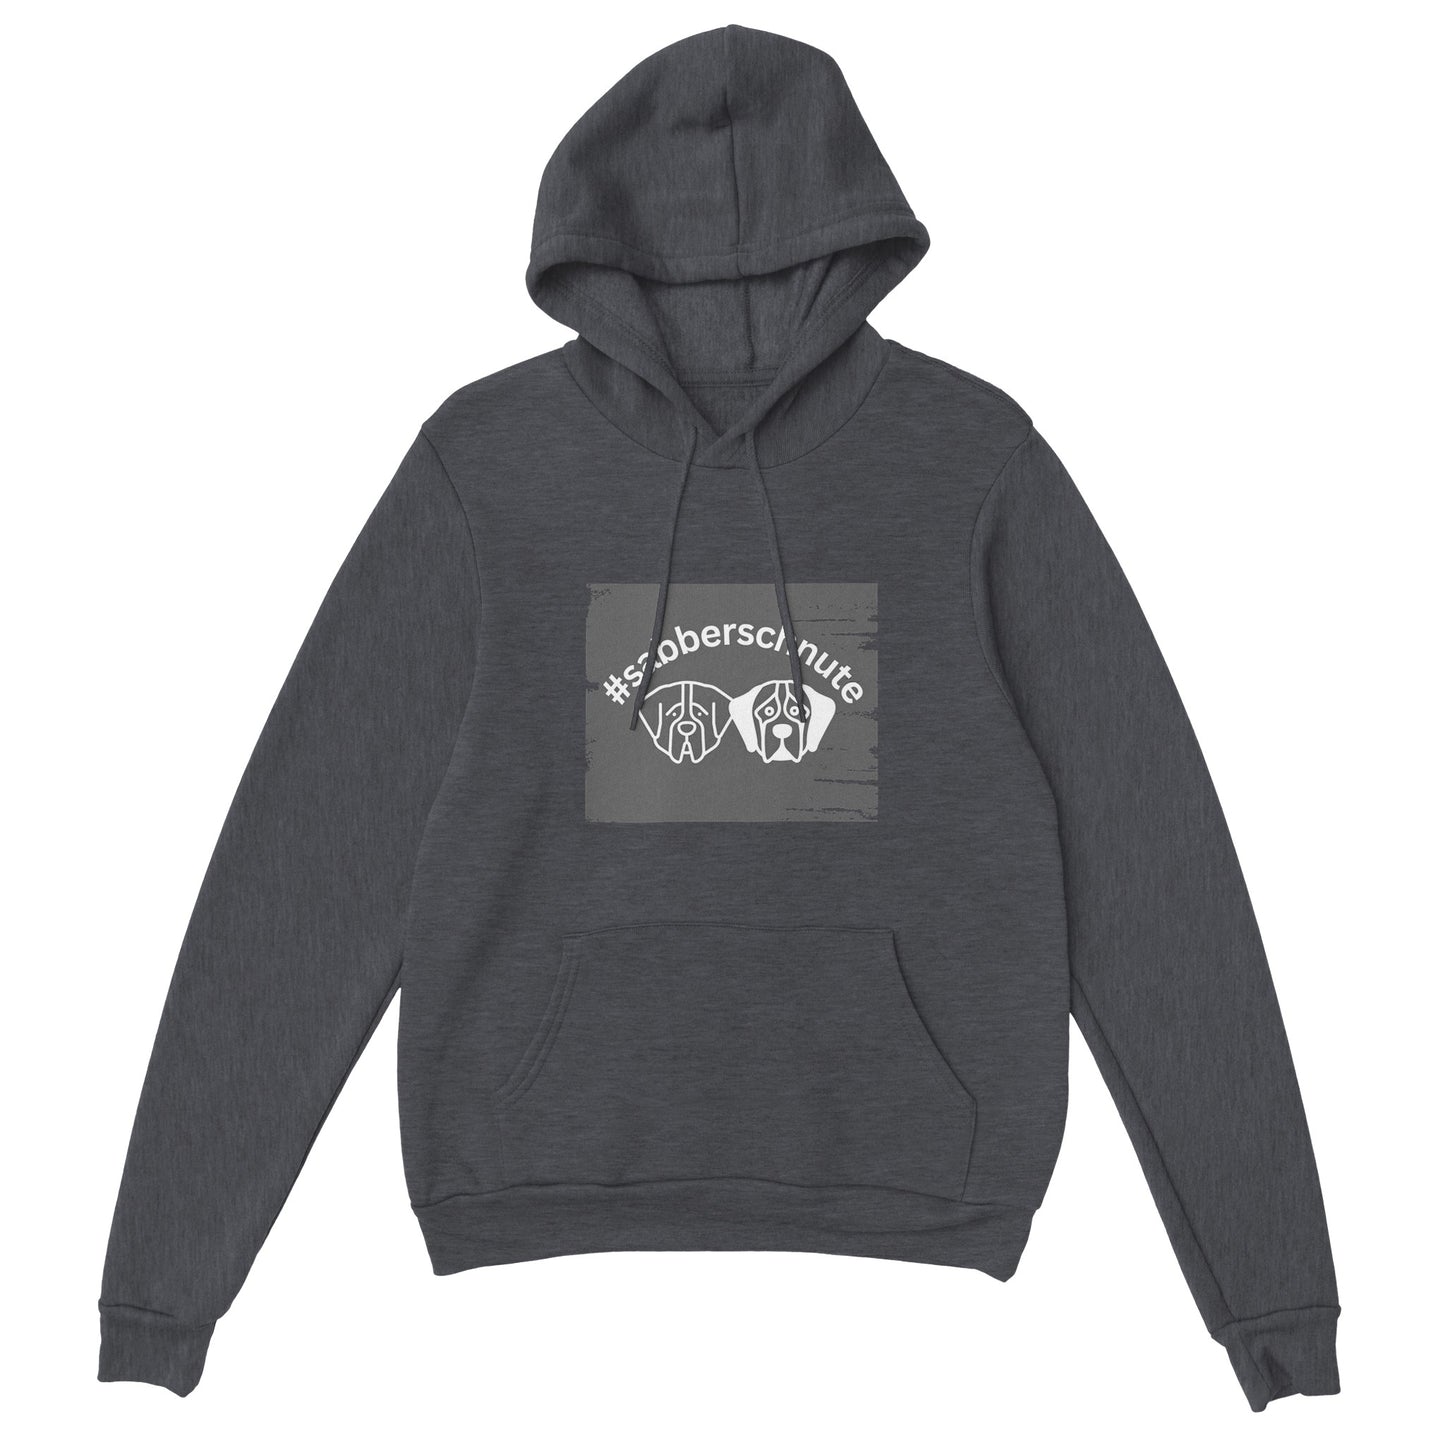 Drooling Schnute Hanni and Isa women's hoodie